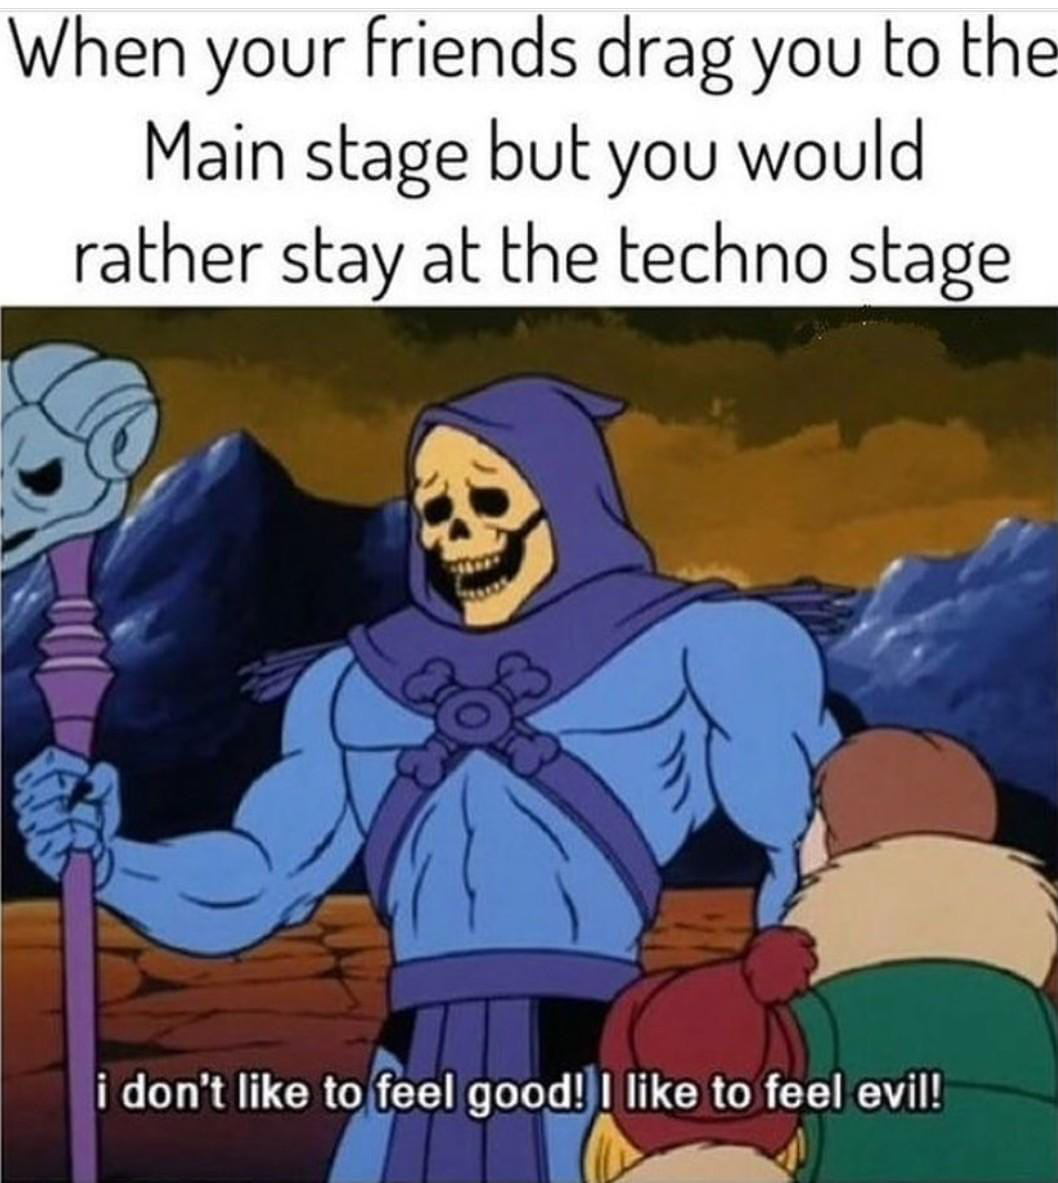 when your friends drag you to the main stage but you would rather stay at the techno stage, i don't like to feel good, i like to feel evil